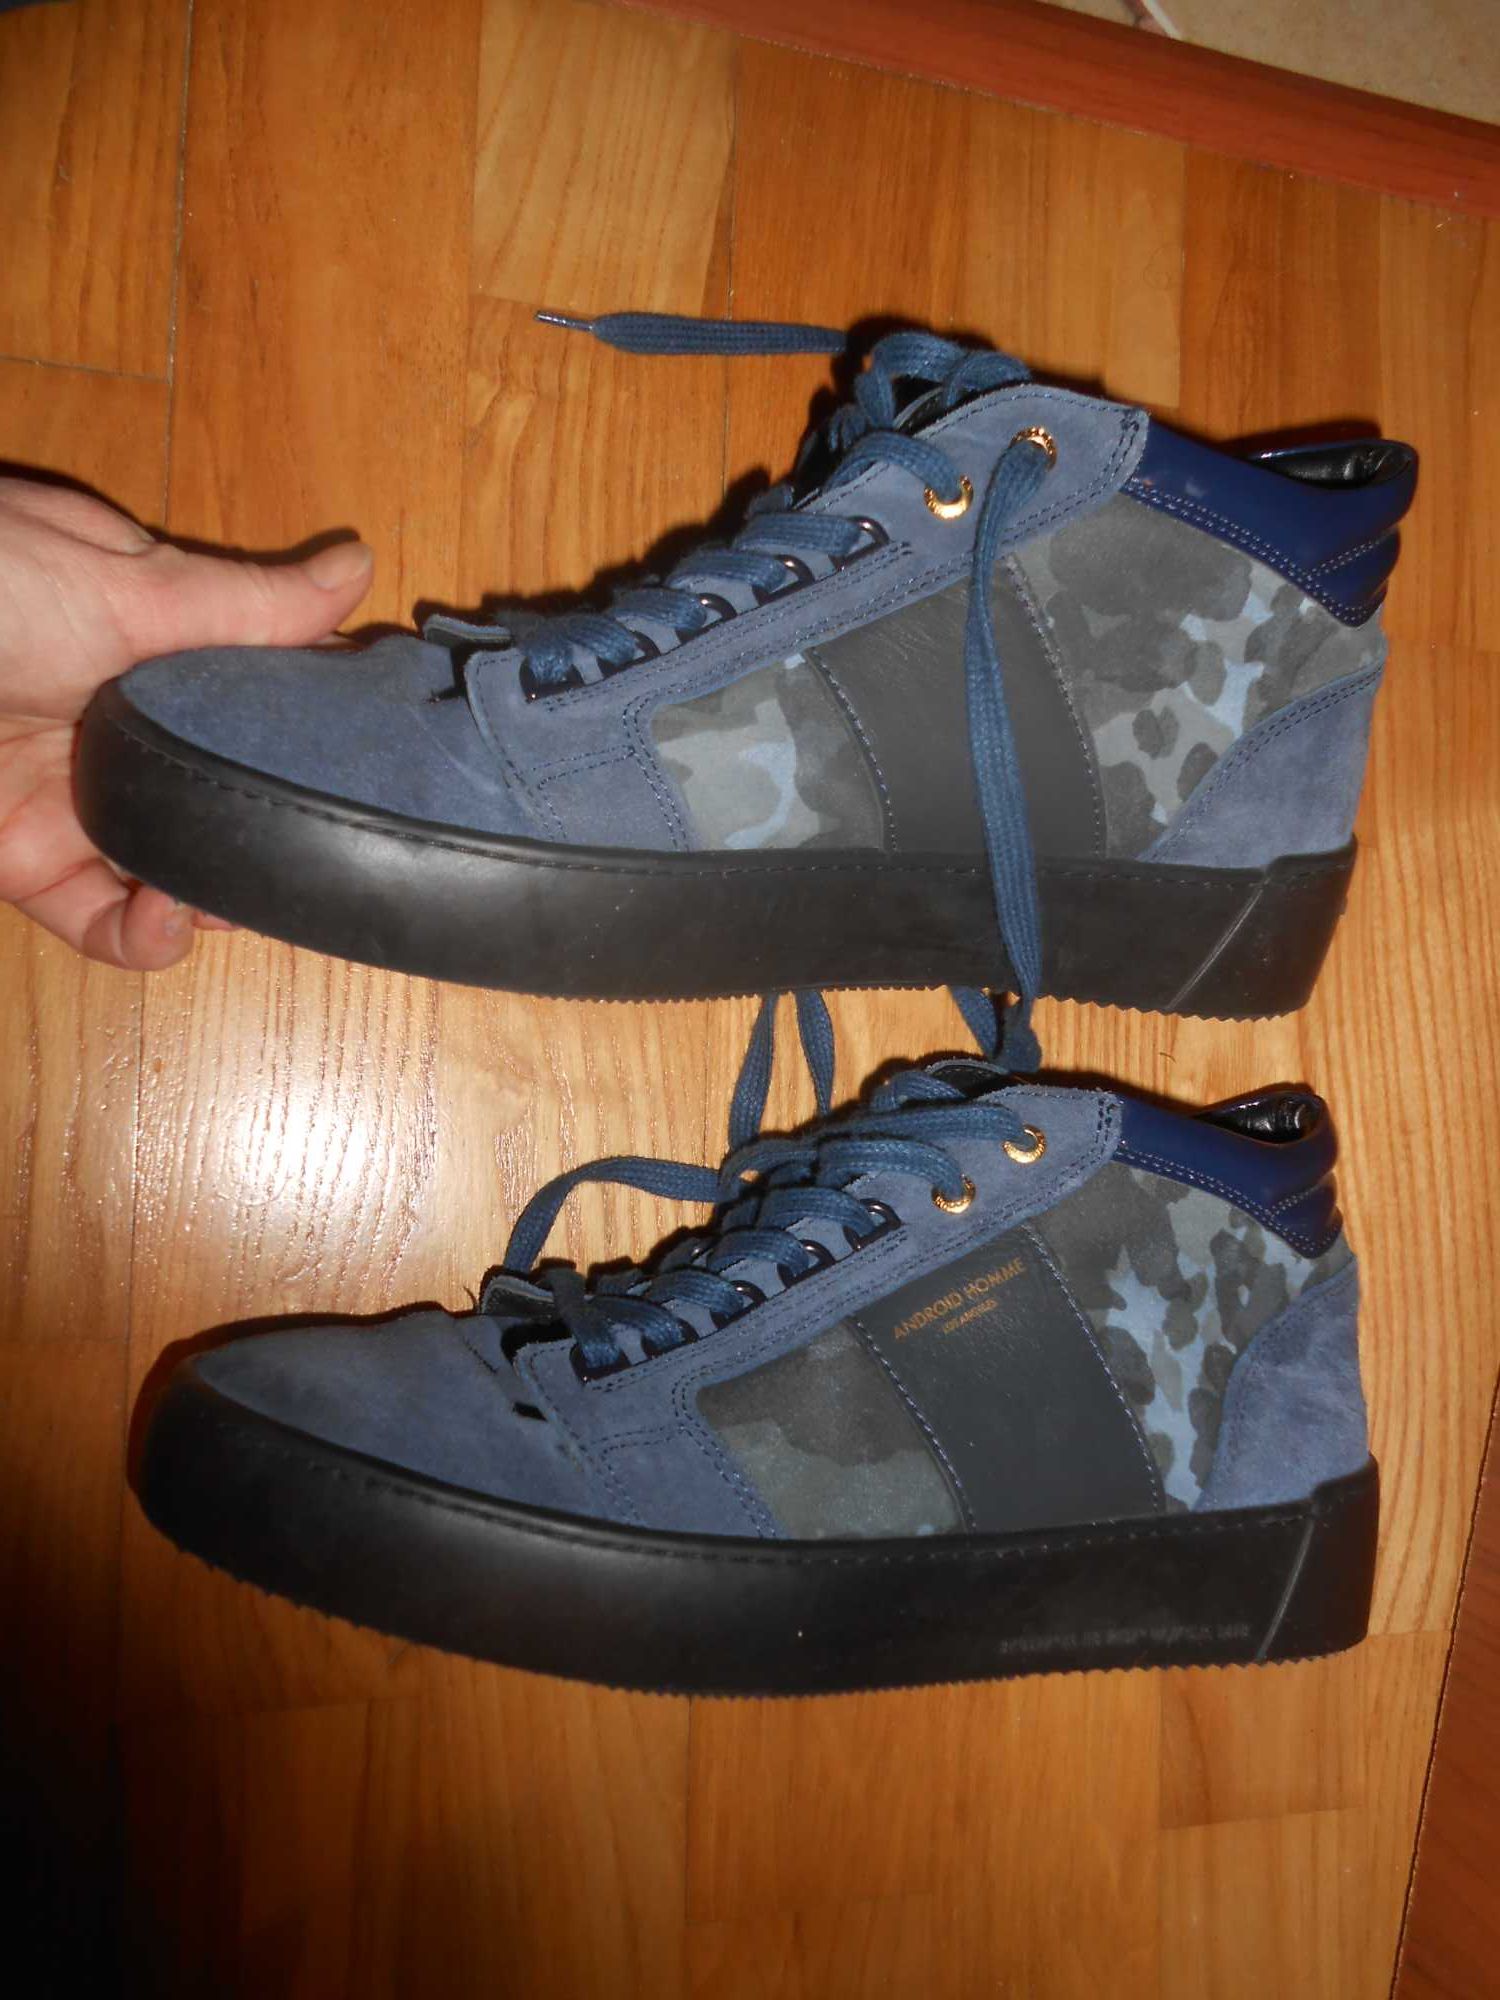 Android Homme Los Angeles buty męskie 43/27,5 cm